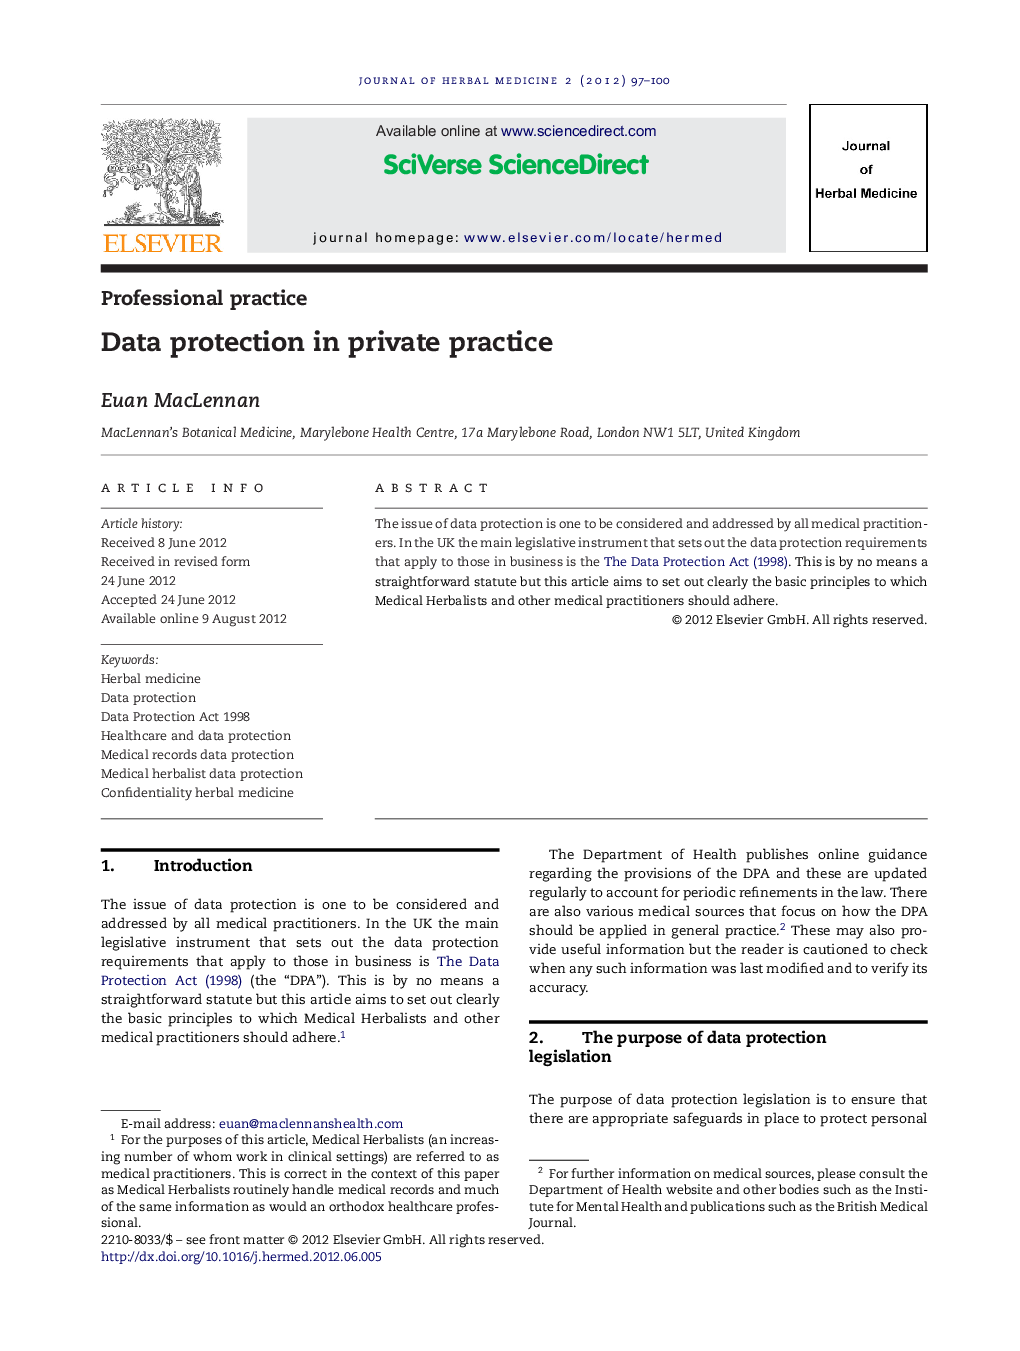 Data protection in private practice